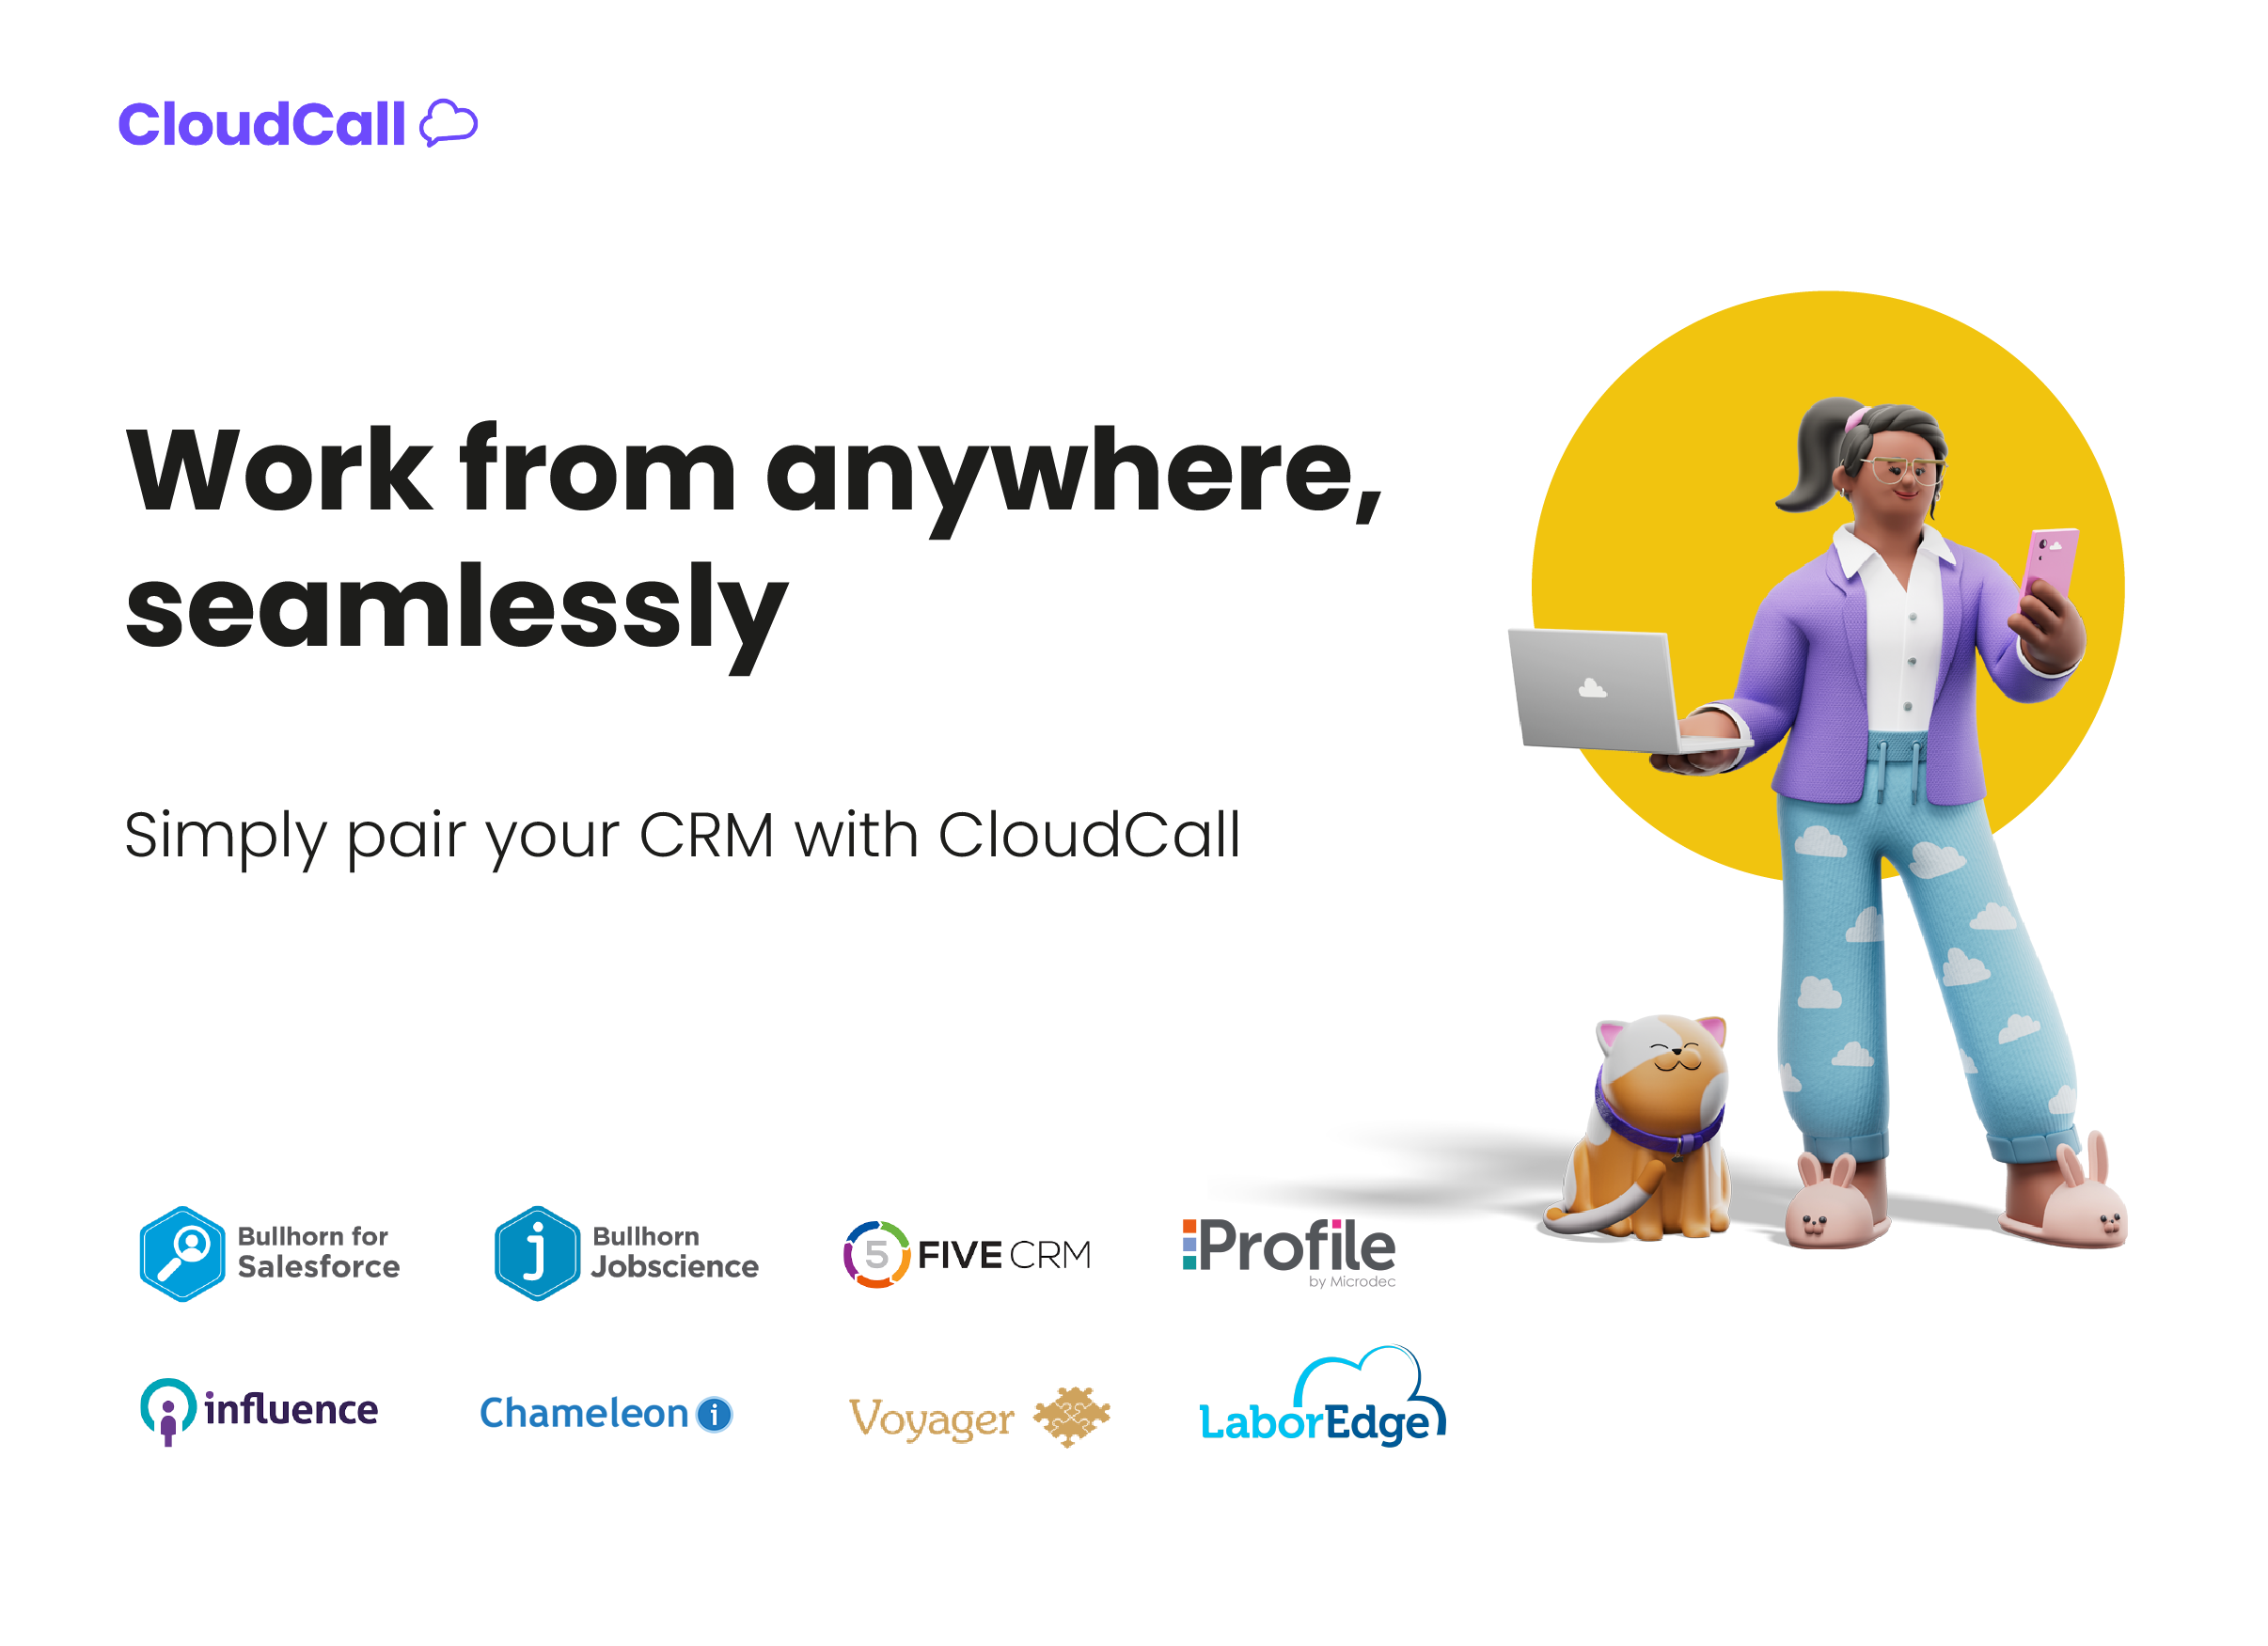 Work from anywhere, seamlessly, when you pair CloudCall with  Bullhorn for Salesforce, Bullhorn Jobscience, FIVECRM, Profile Recruitment, Influence, Chameleon-i, Voyager, or LaborEdge